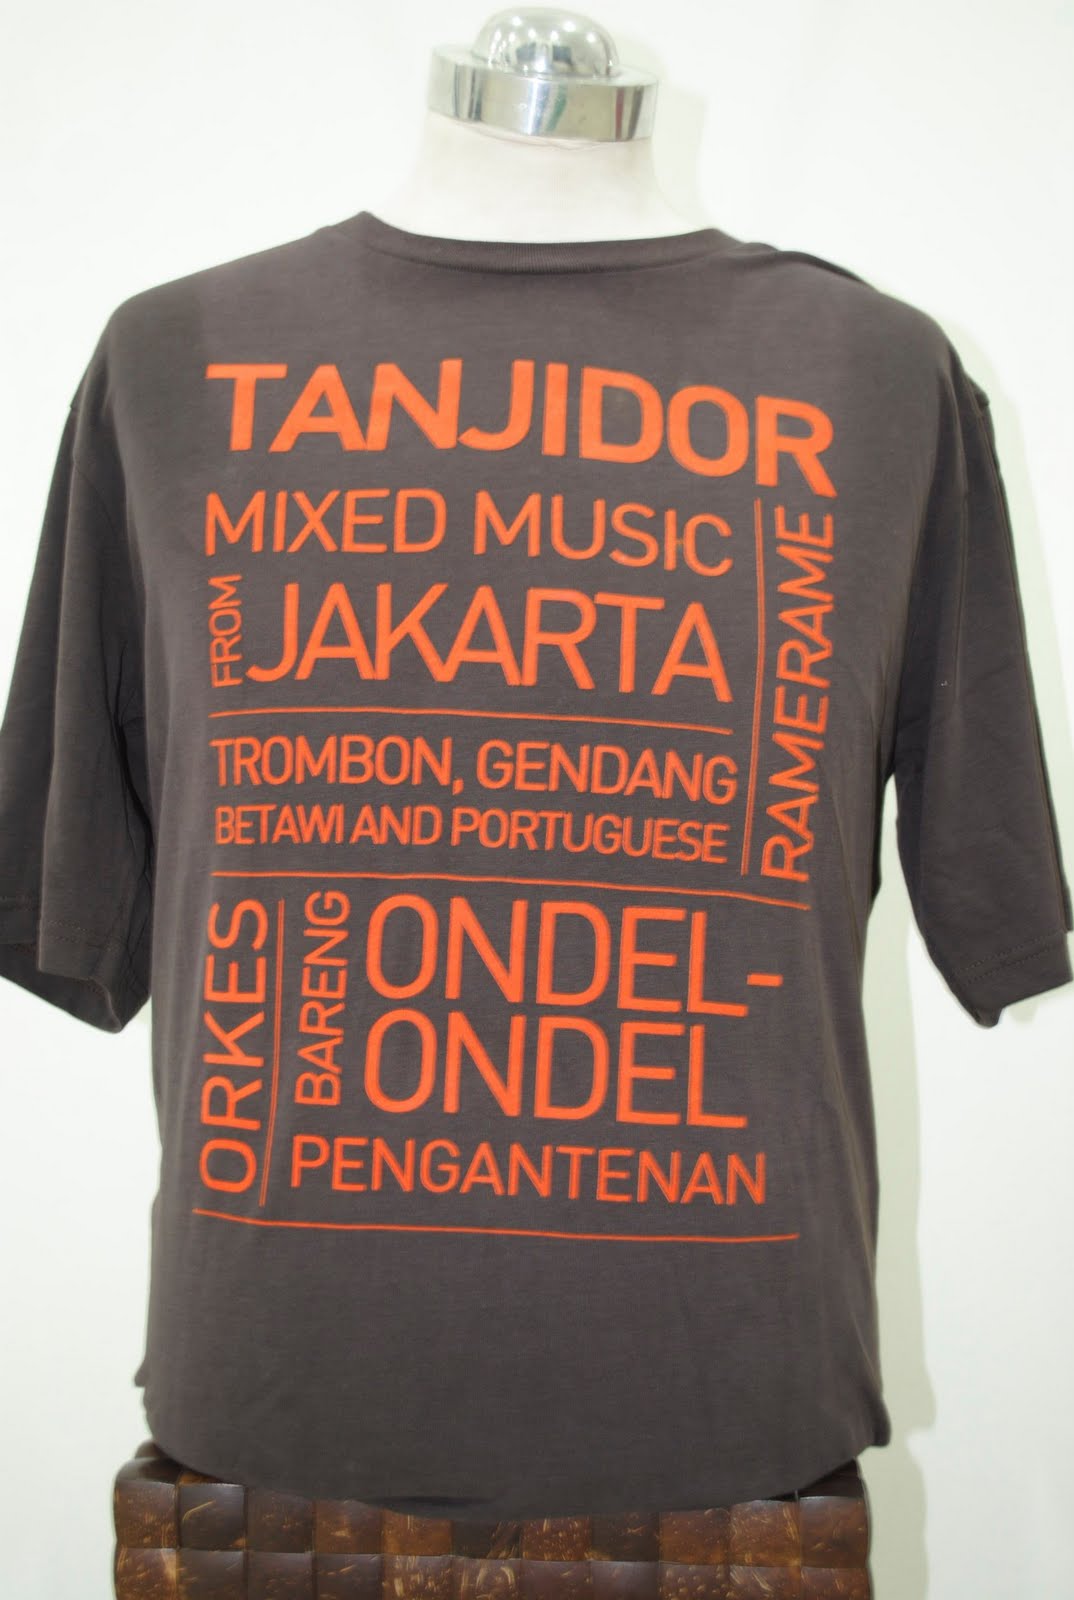 Download this Souvenir Jakarta Tanjidor Clothe picture